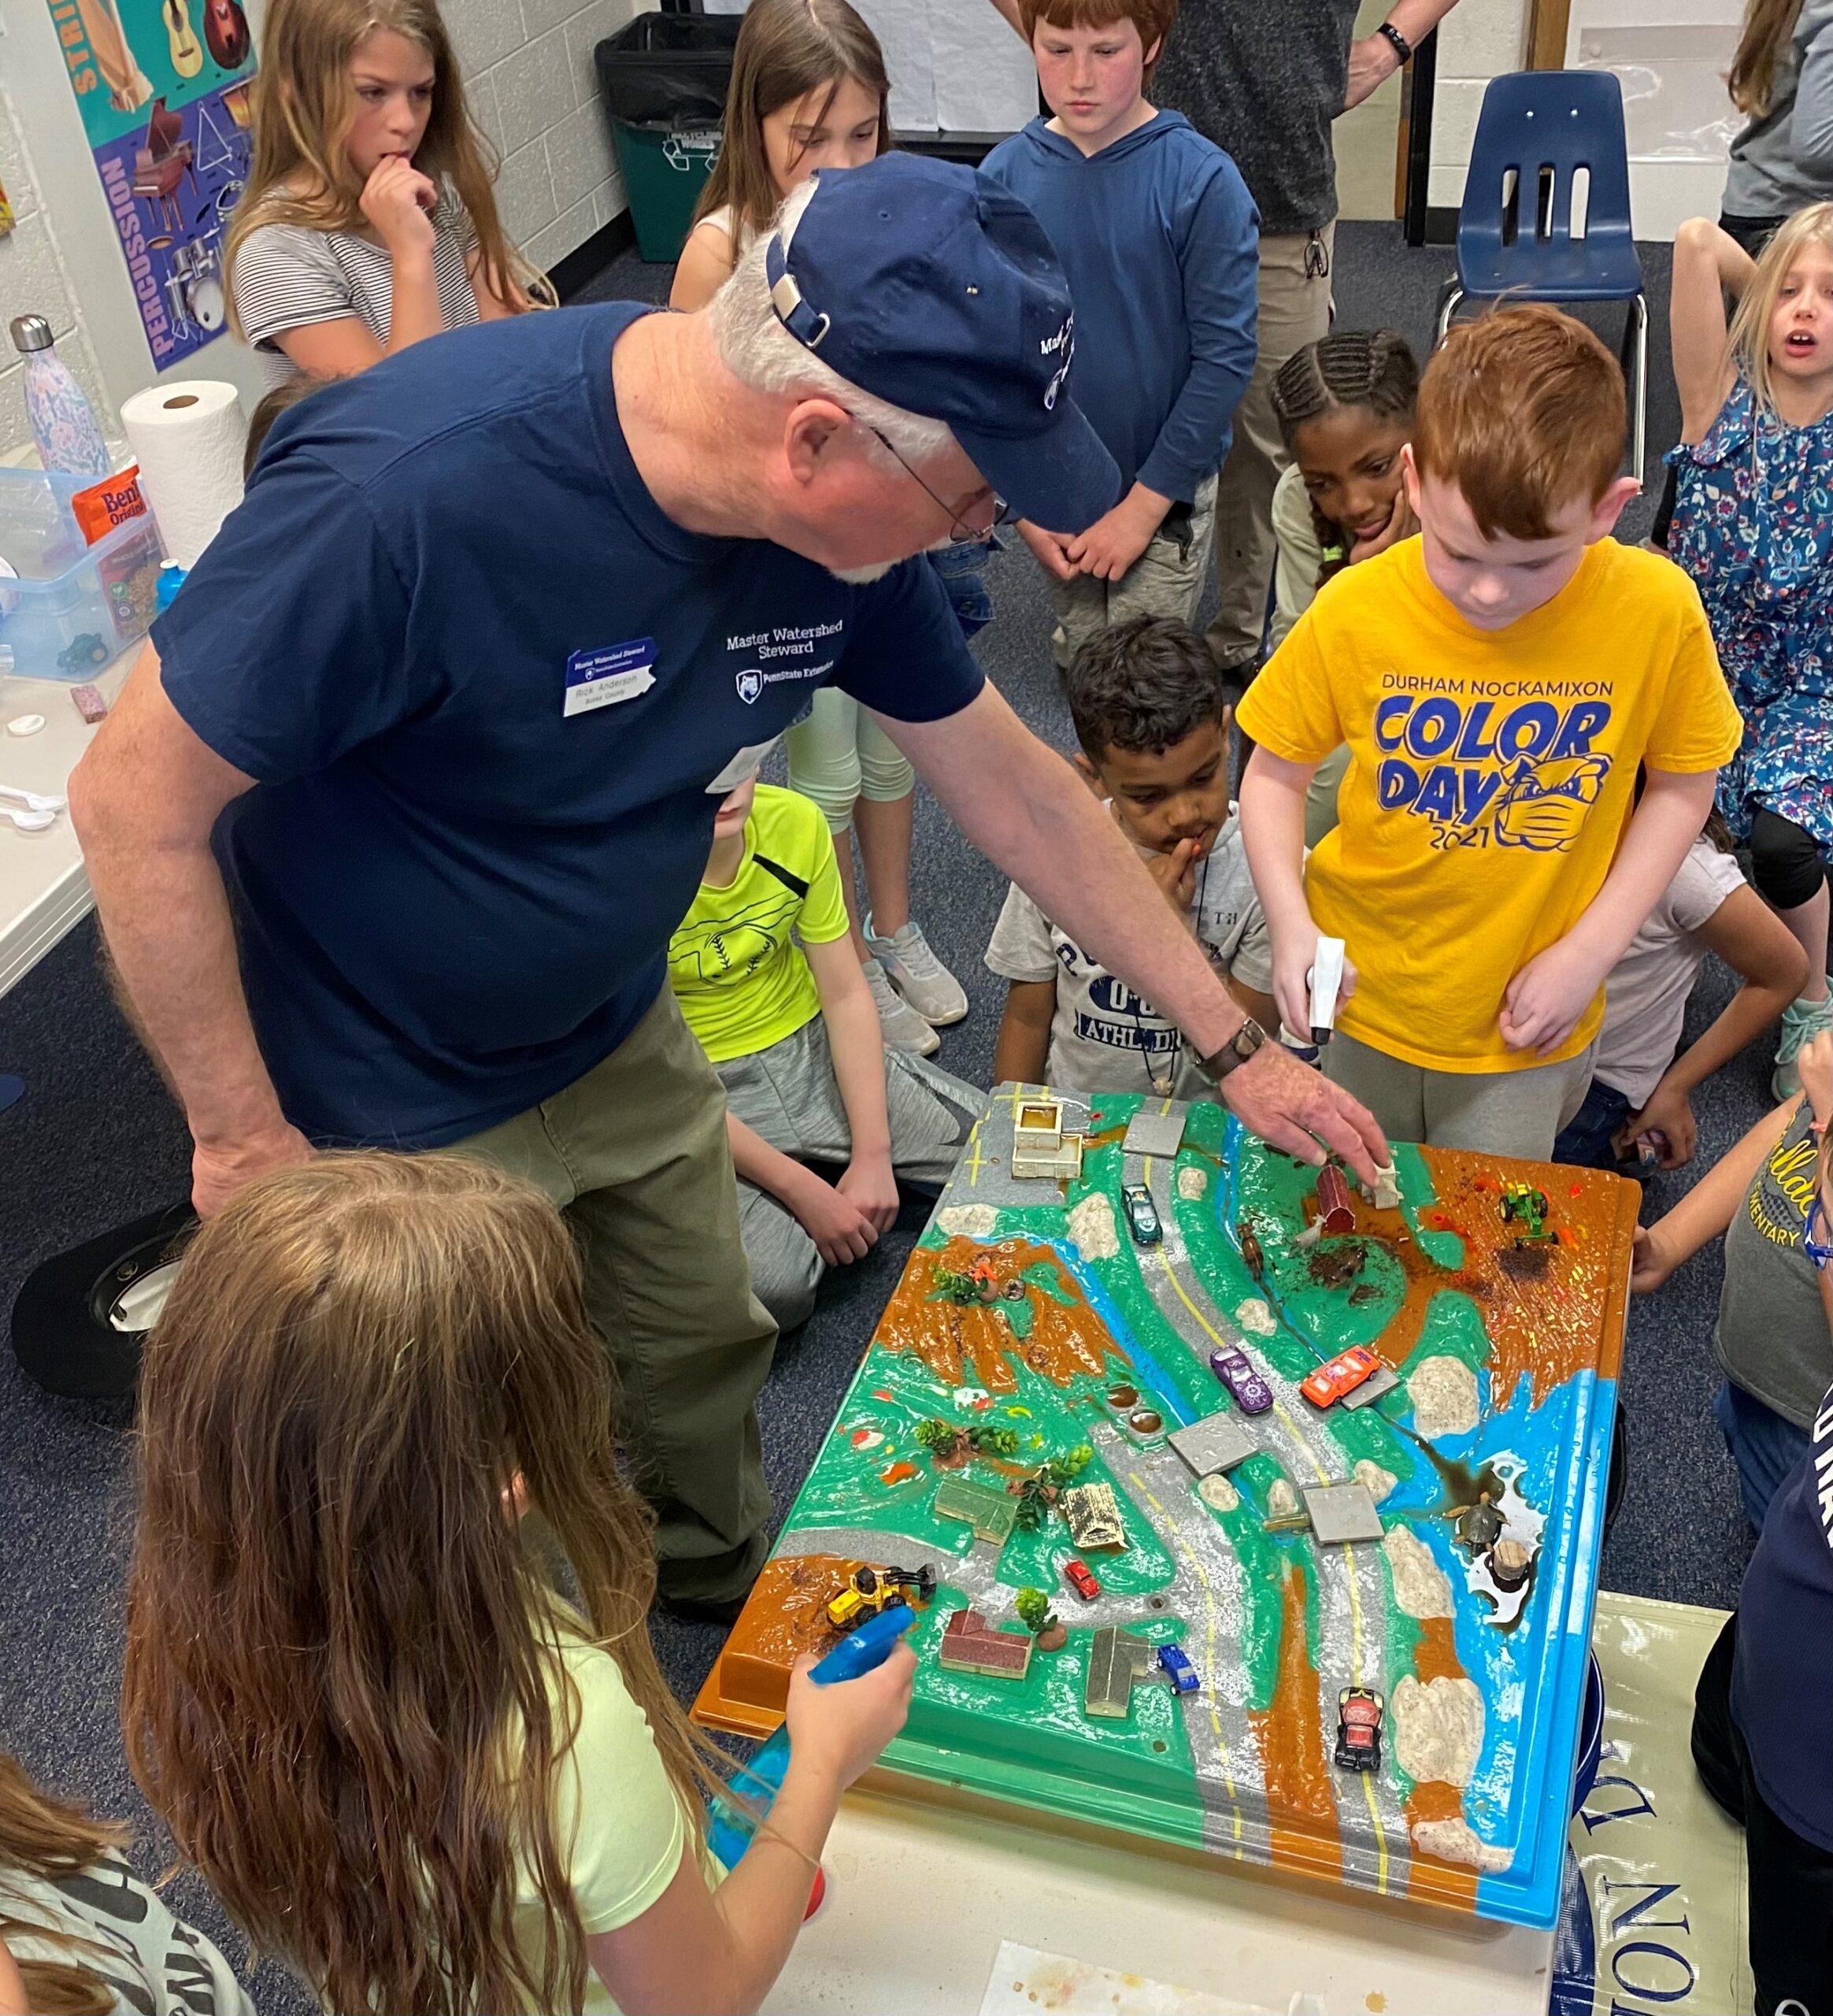 A demonstration of the plastic Enviroscape model for a group of kids.